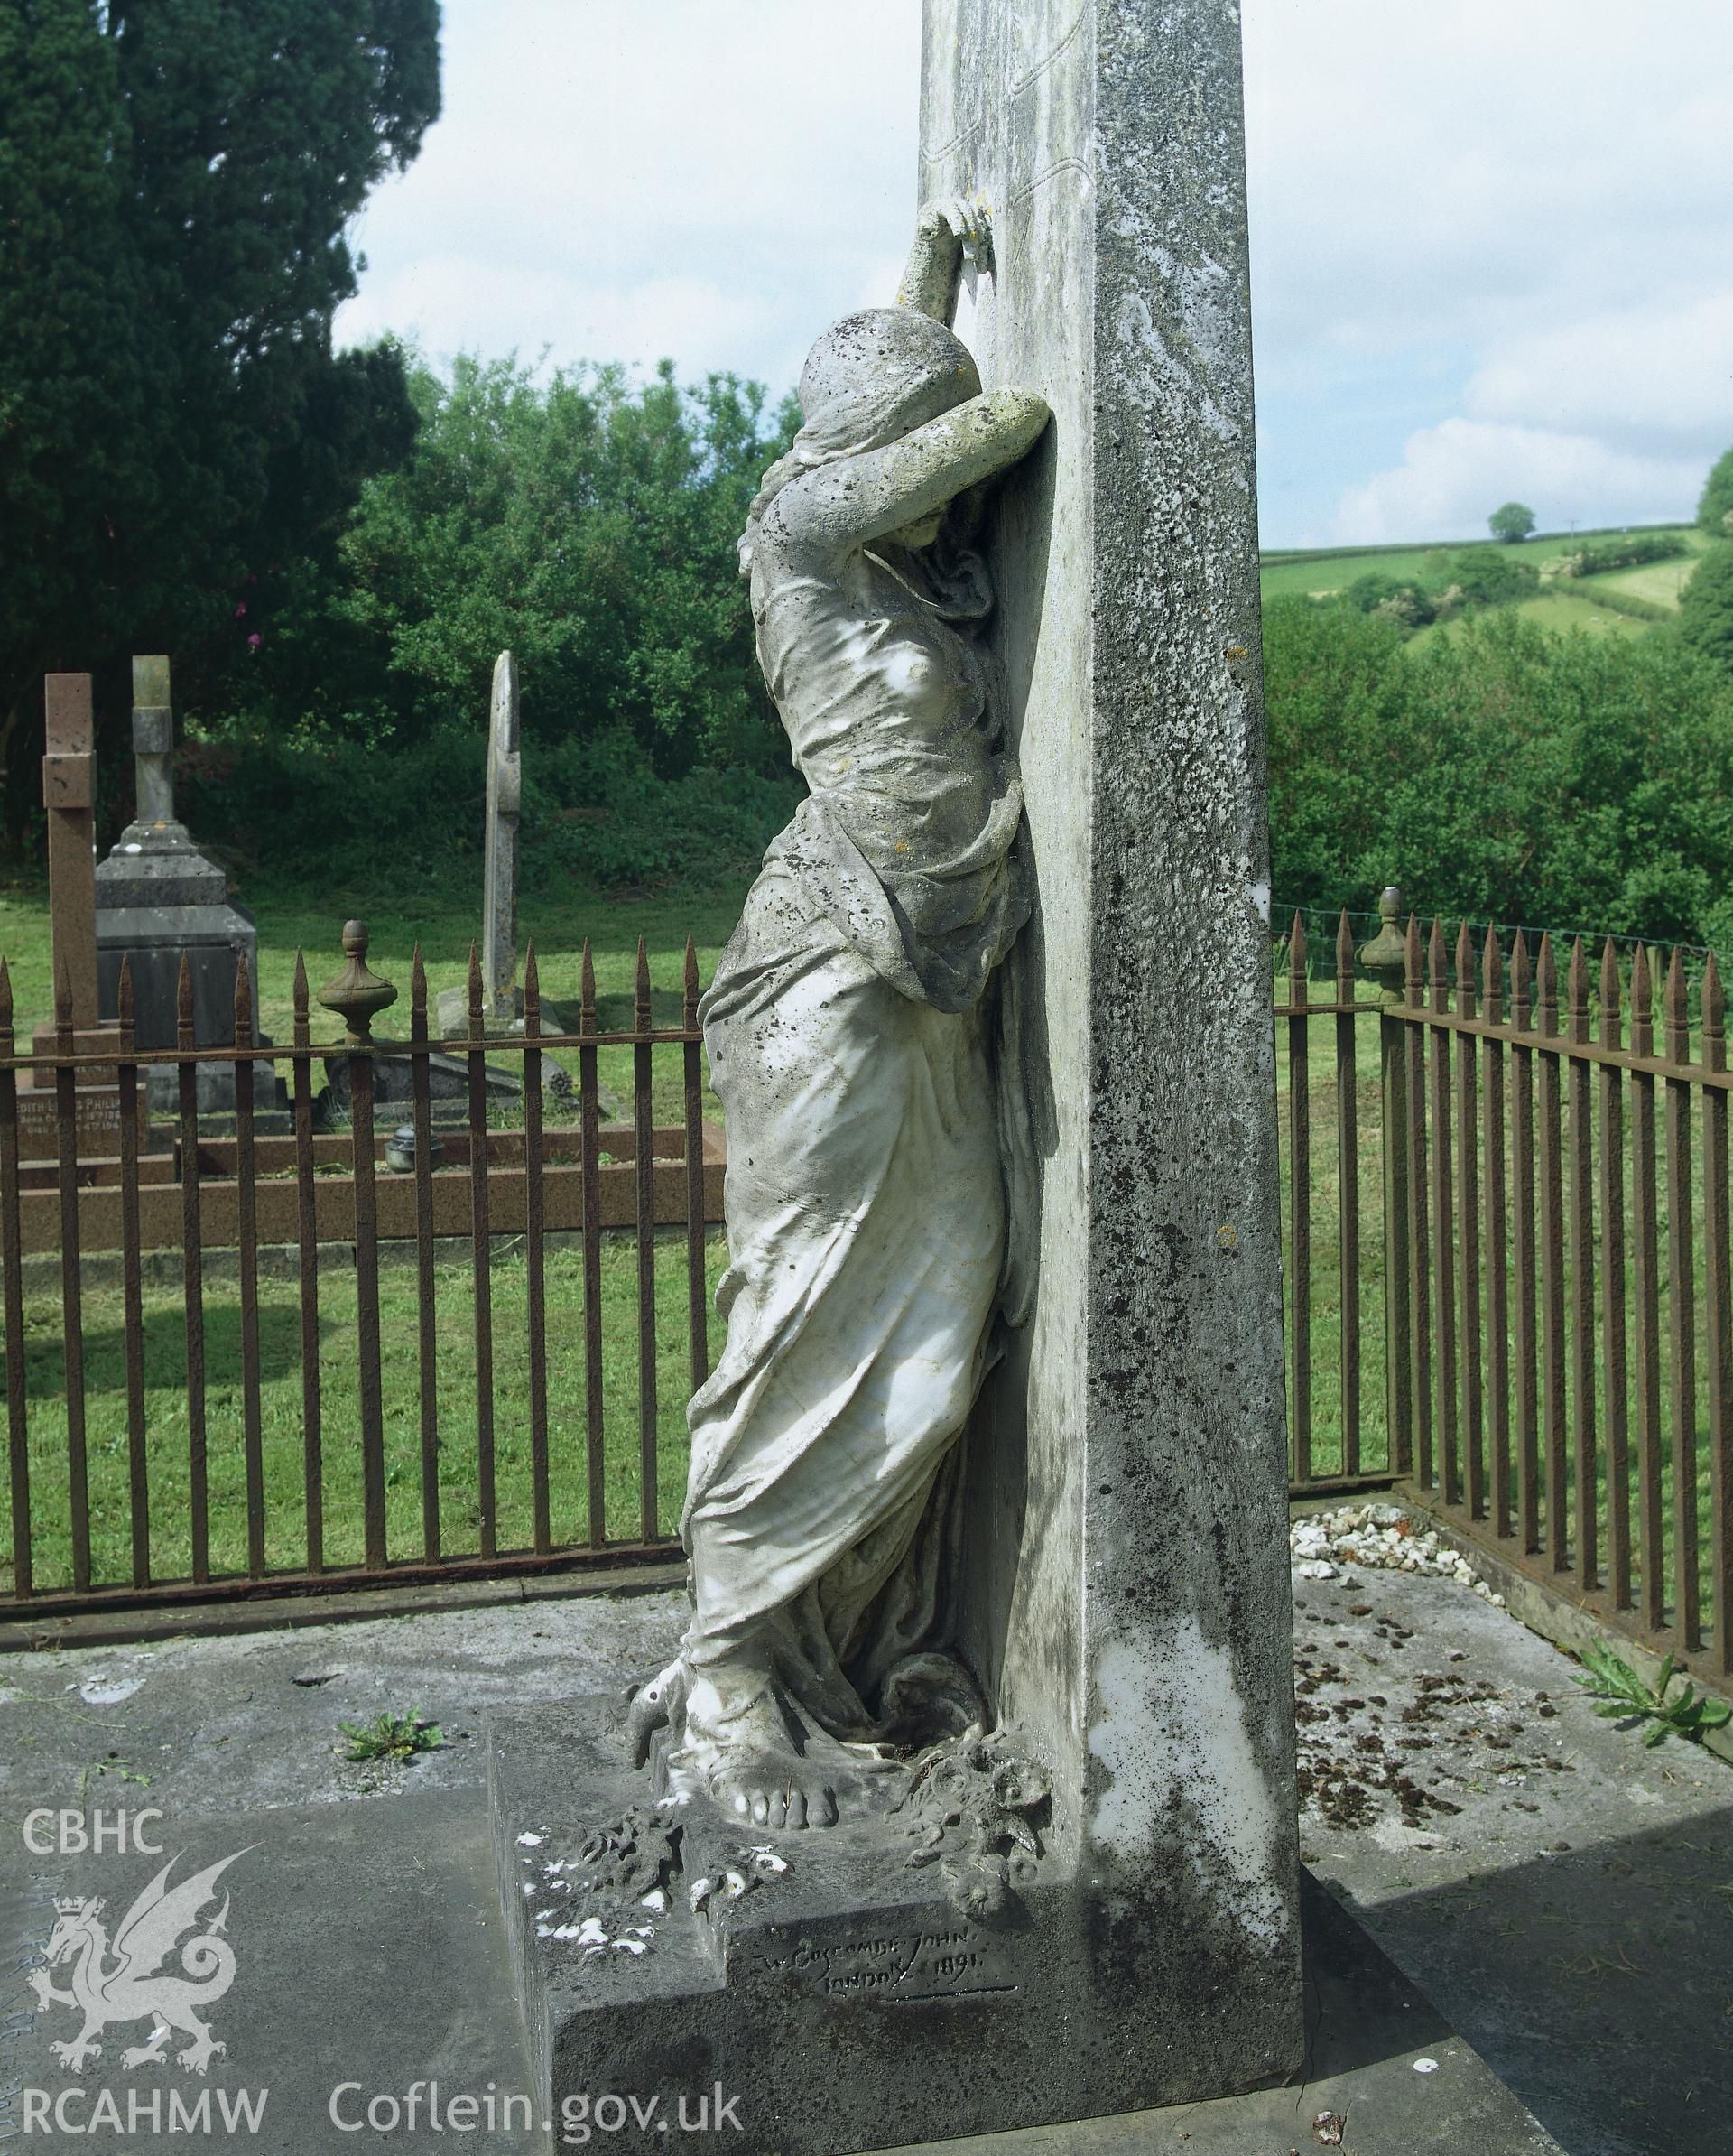 RCAHMW colour transparency showing memorial to W. Powell, in the grounds of Llanboidy Church